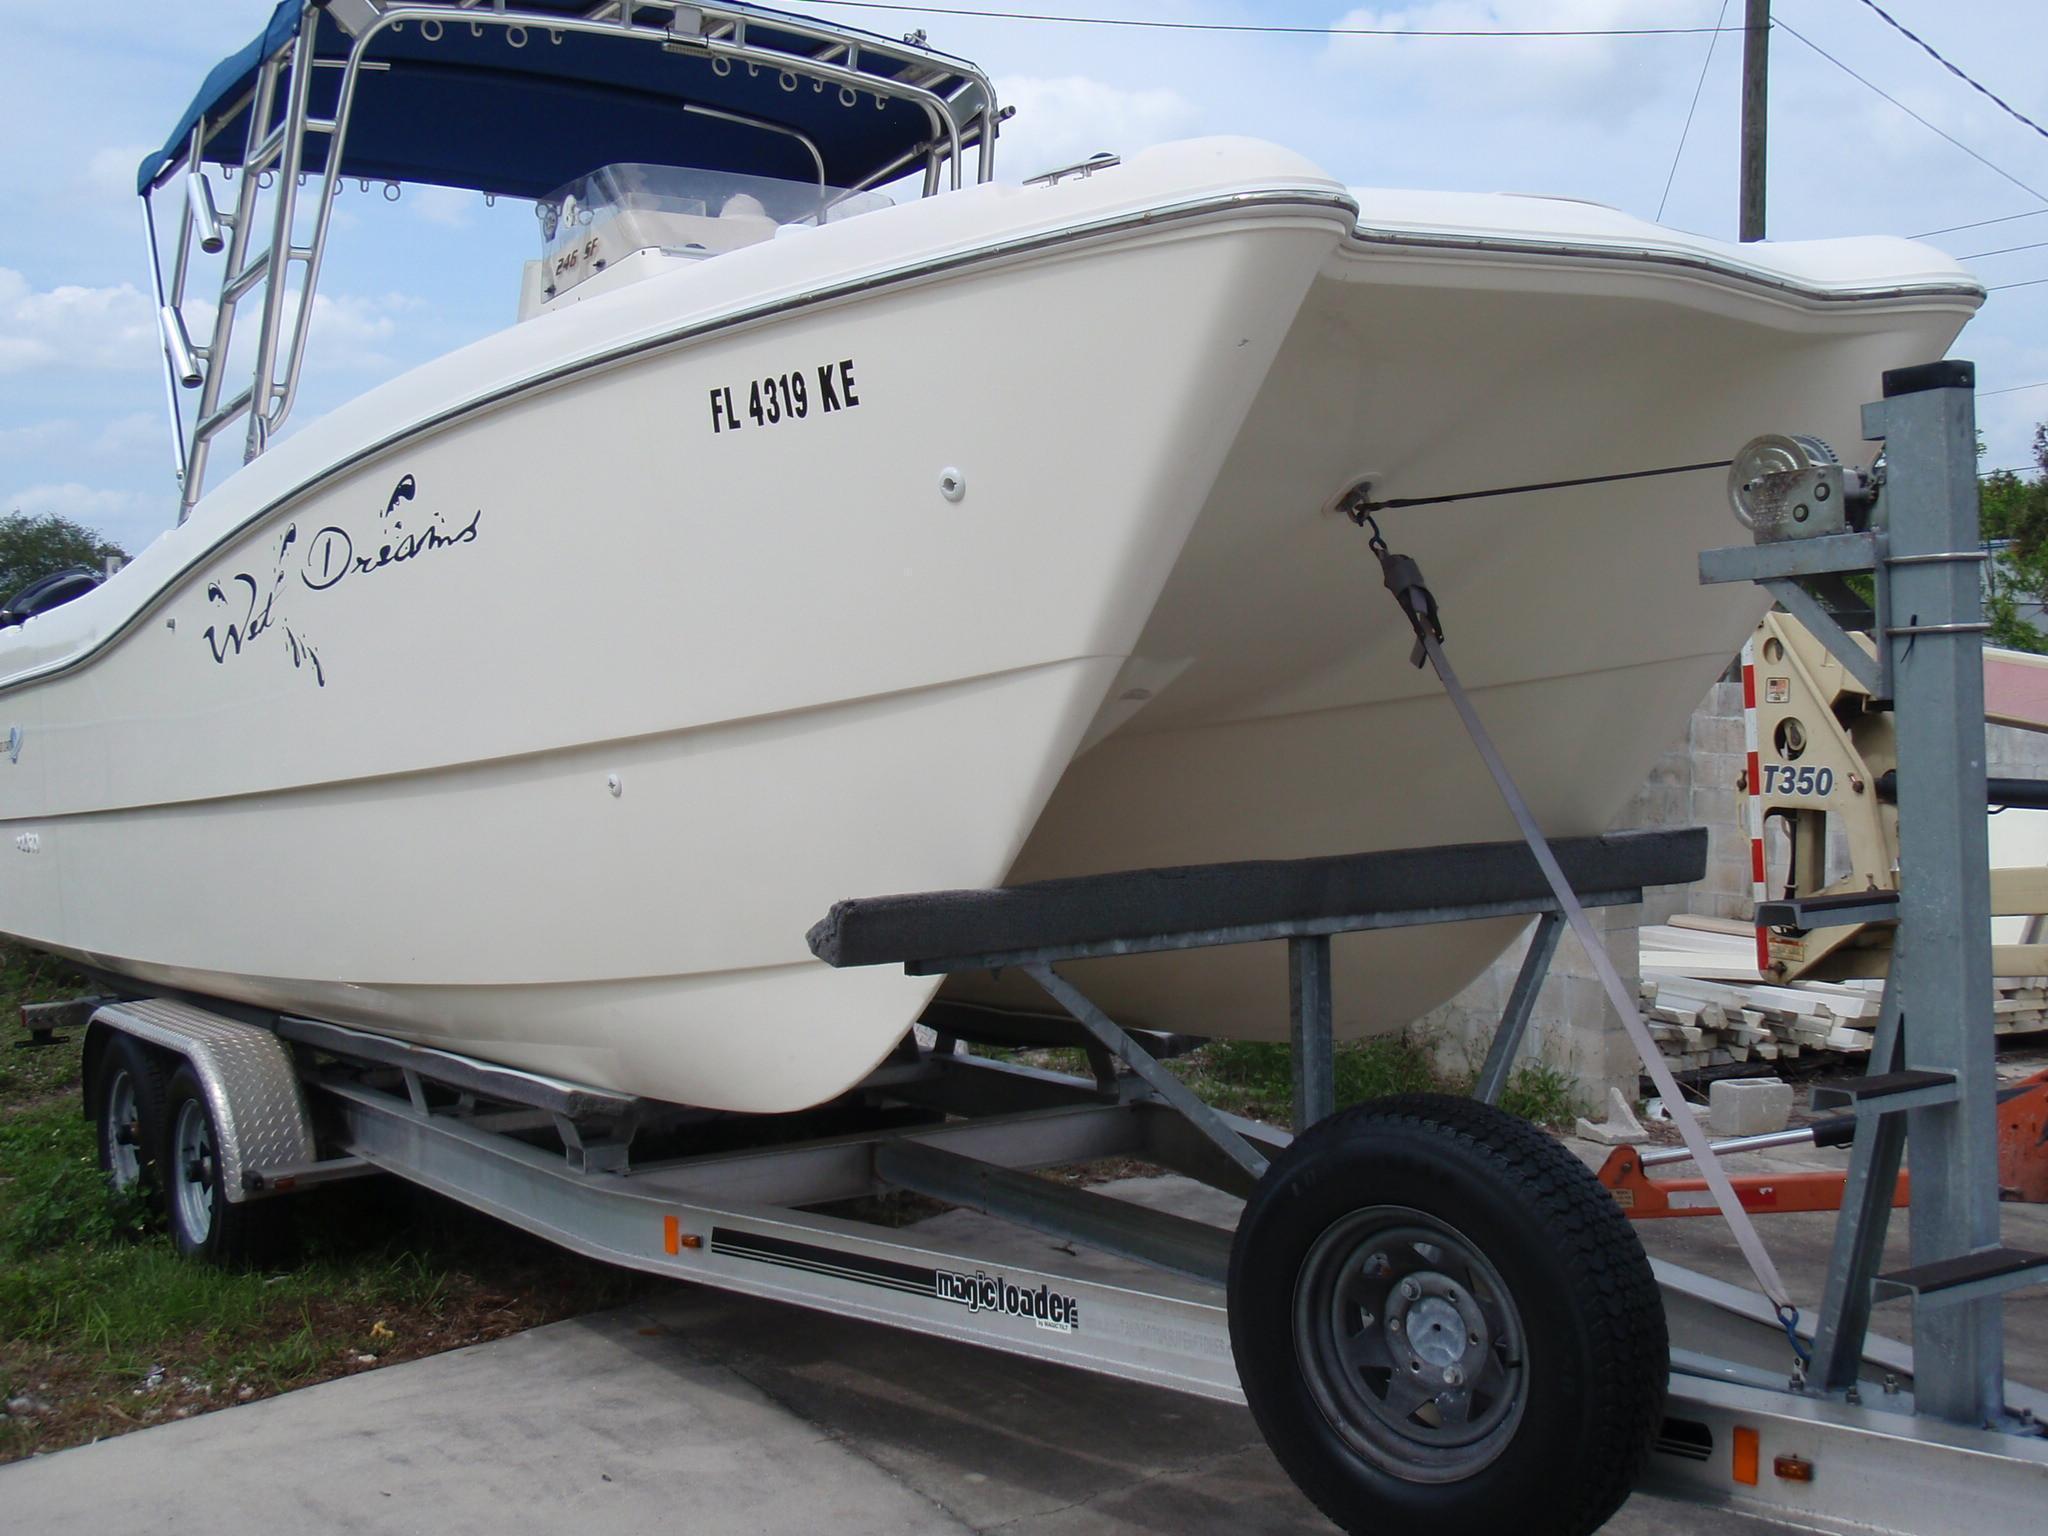 World Cat 246 Center Console, Fort Myers